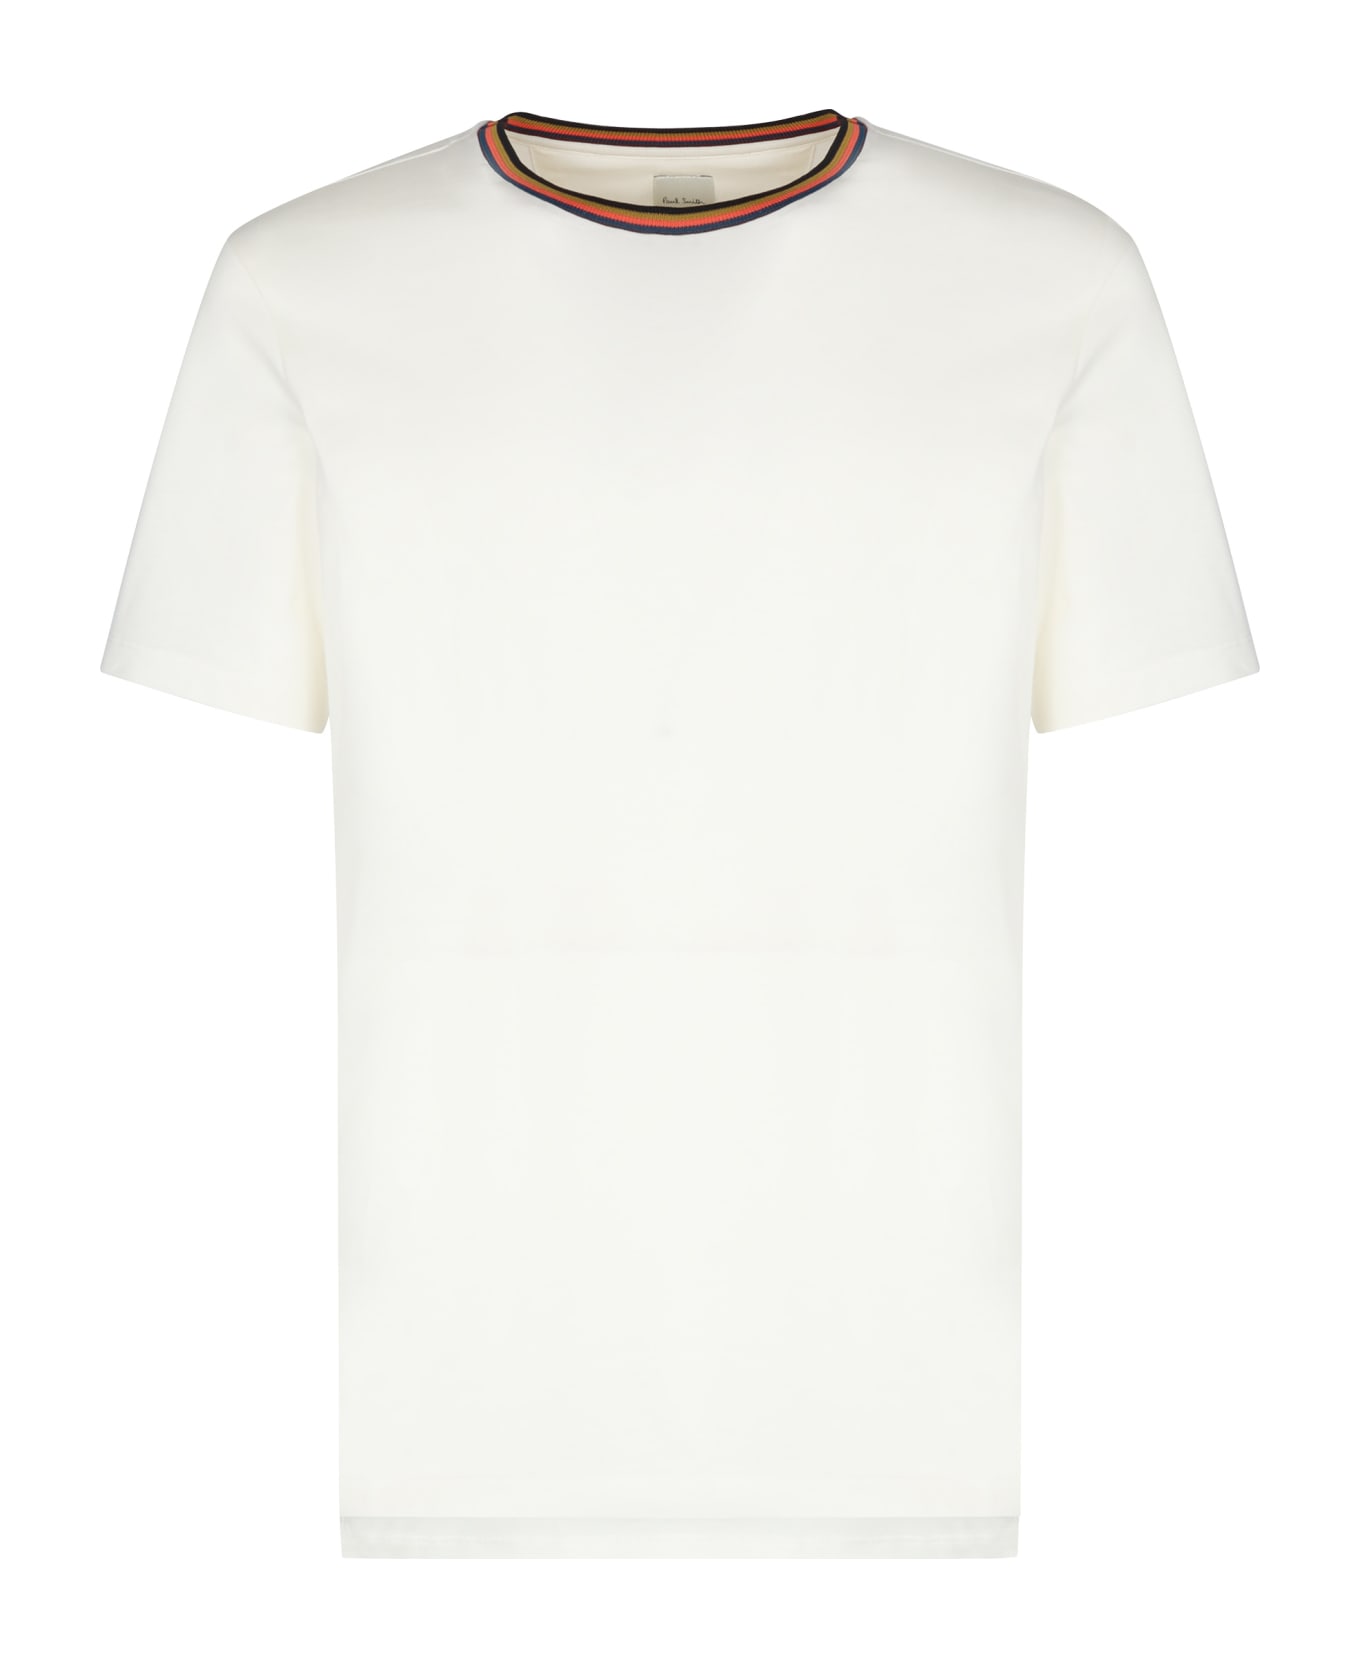 PS by Paul Smith Cotton T-shirt T-Shirt - WHITE シャツ